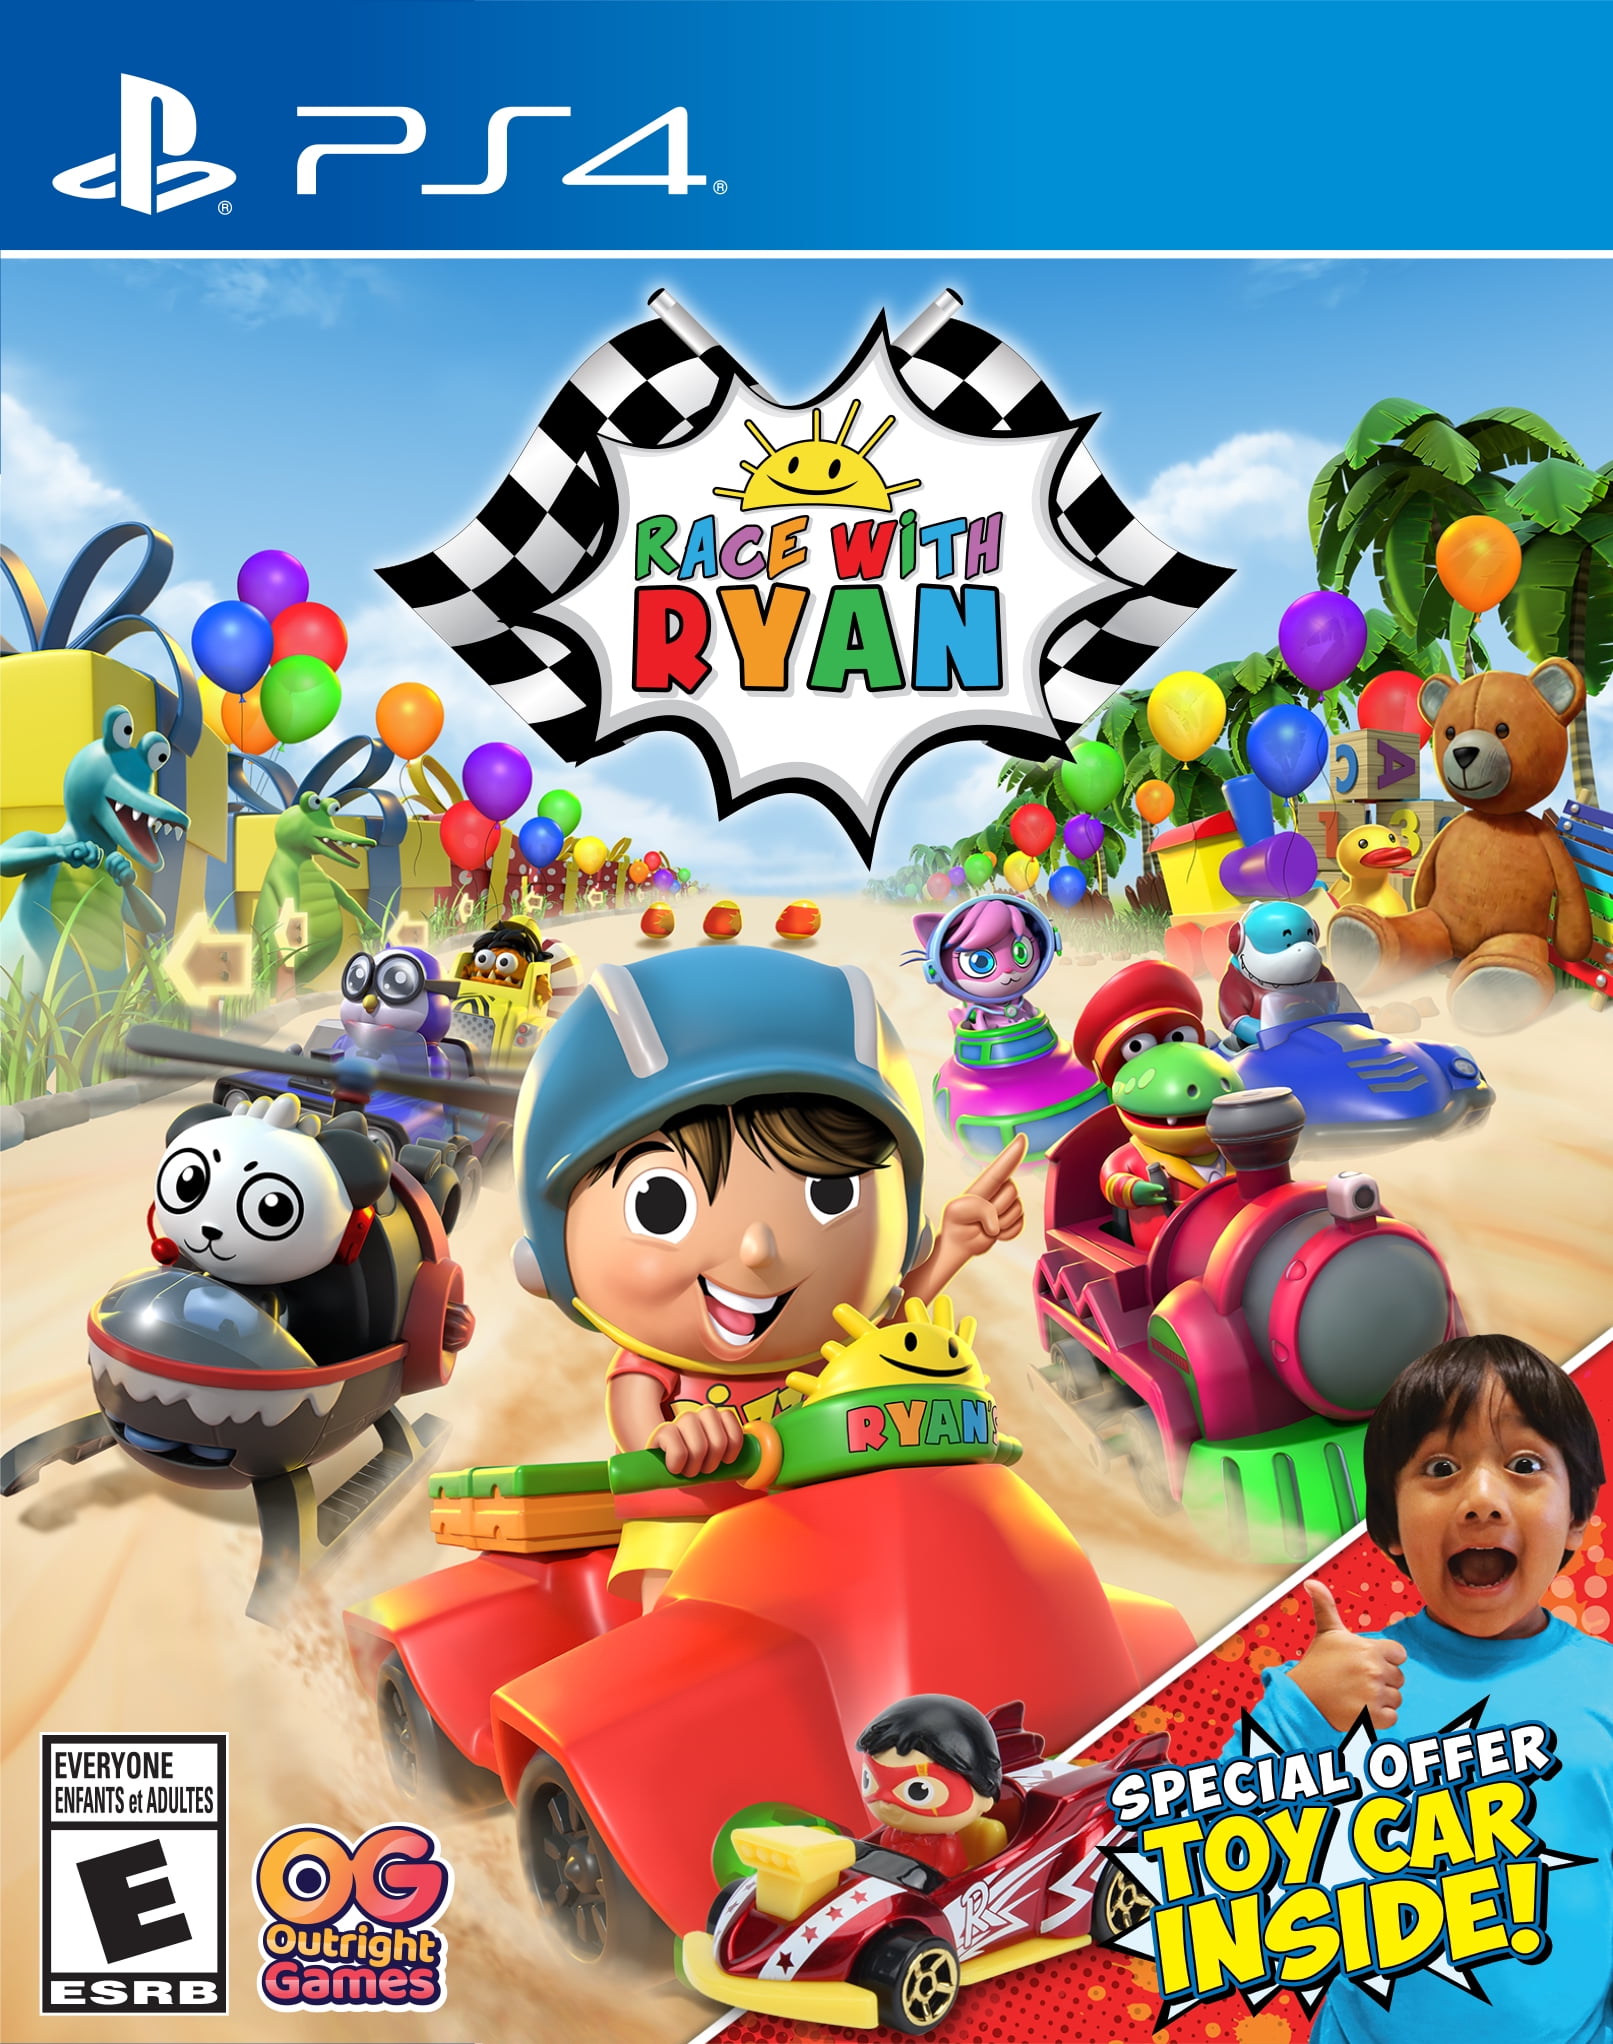 Paw Patrol On a Roll, 4, Outright Games, 819338020181